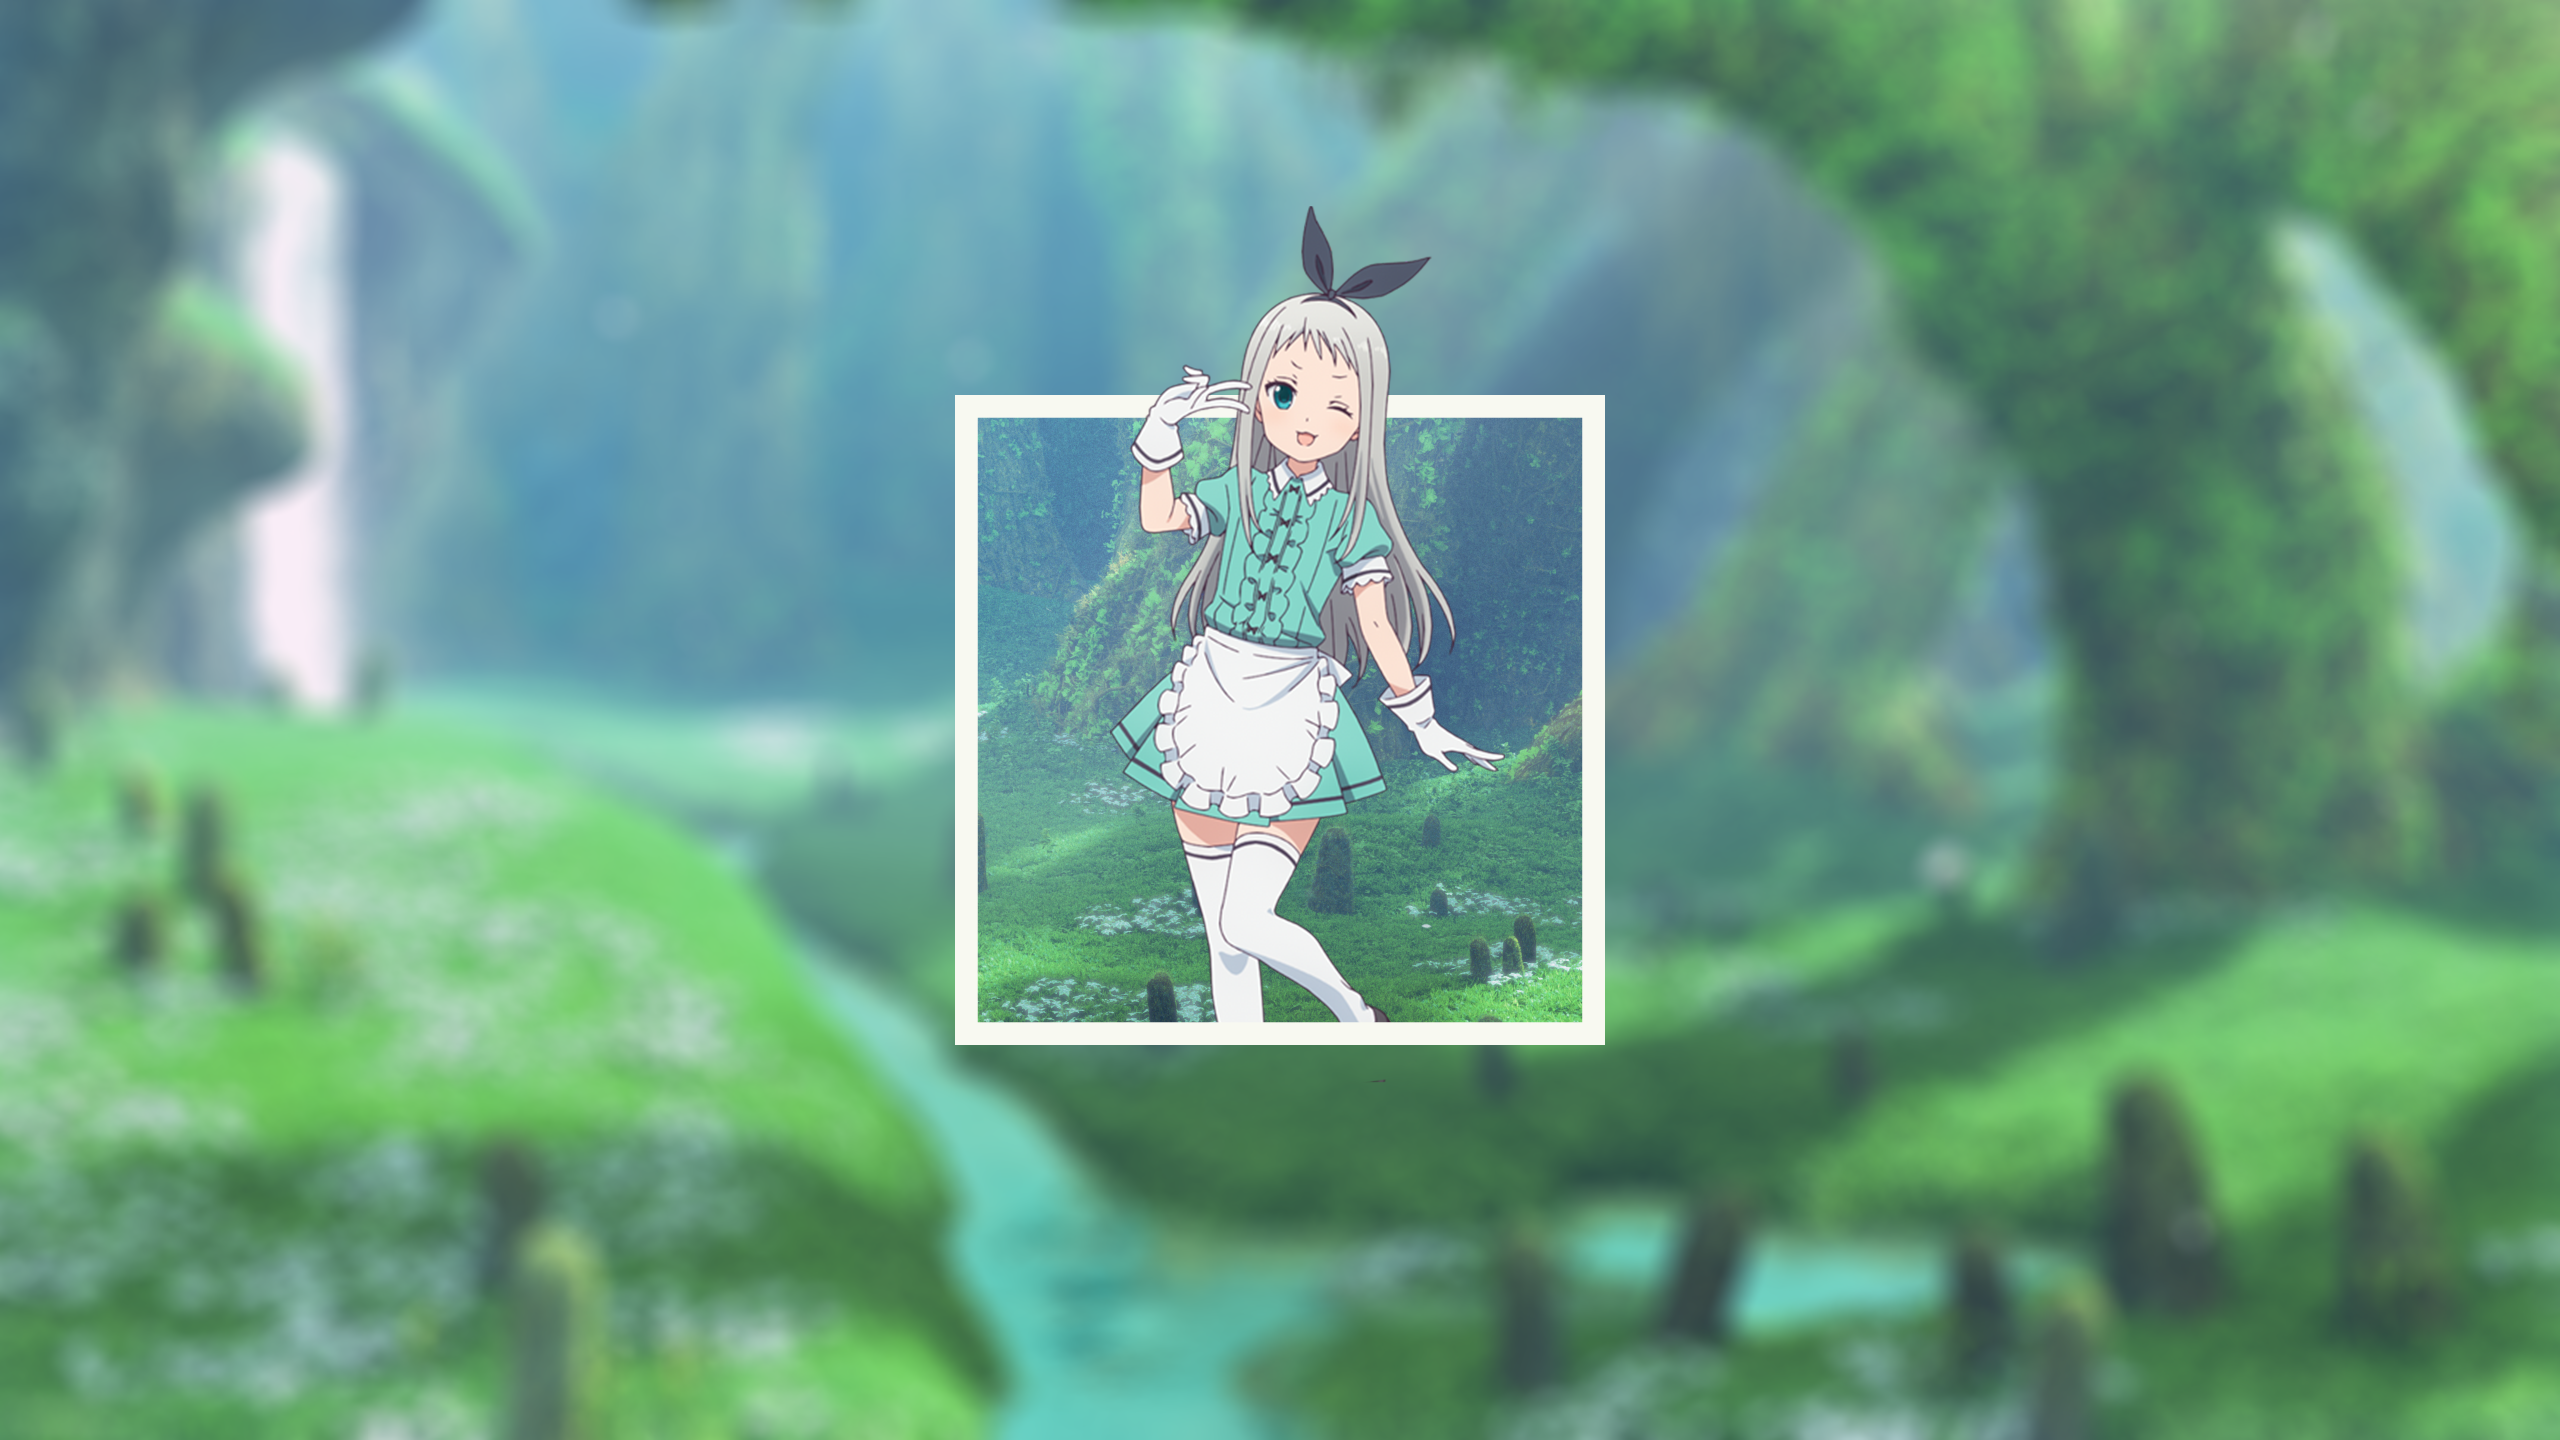 Anime 2560x1440 anime anime boys Kanzaki Hideri landscape picture-in-picture blurred maid maid outfit white hair pale forest